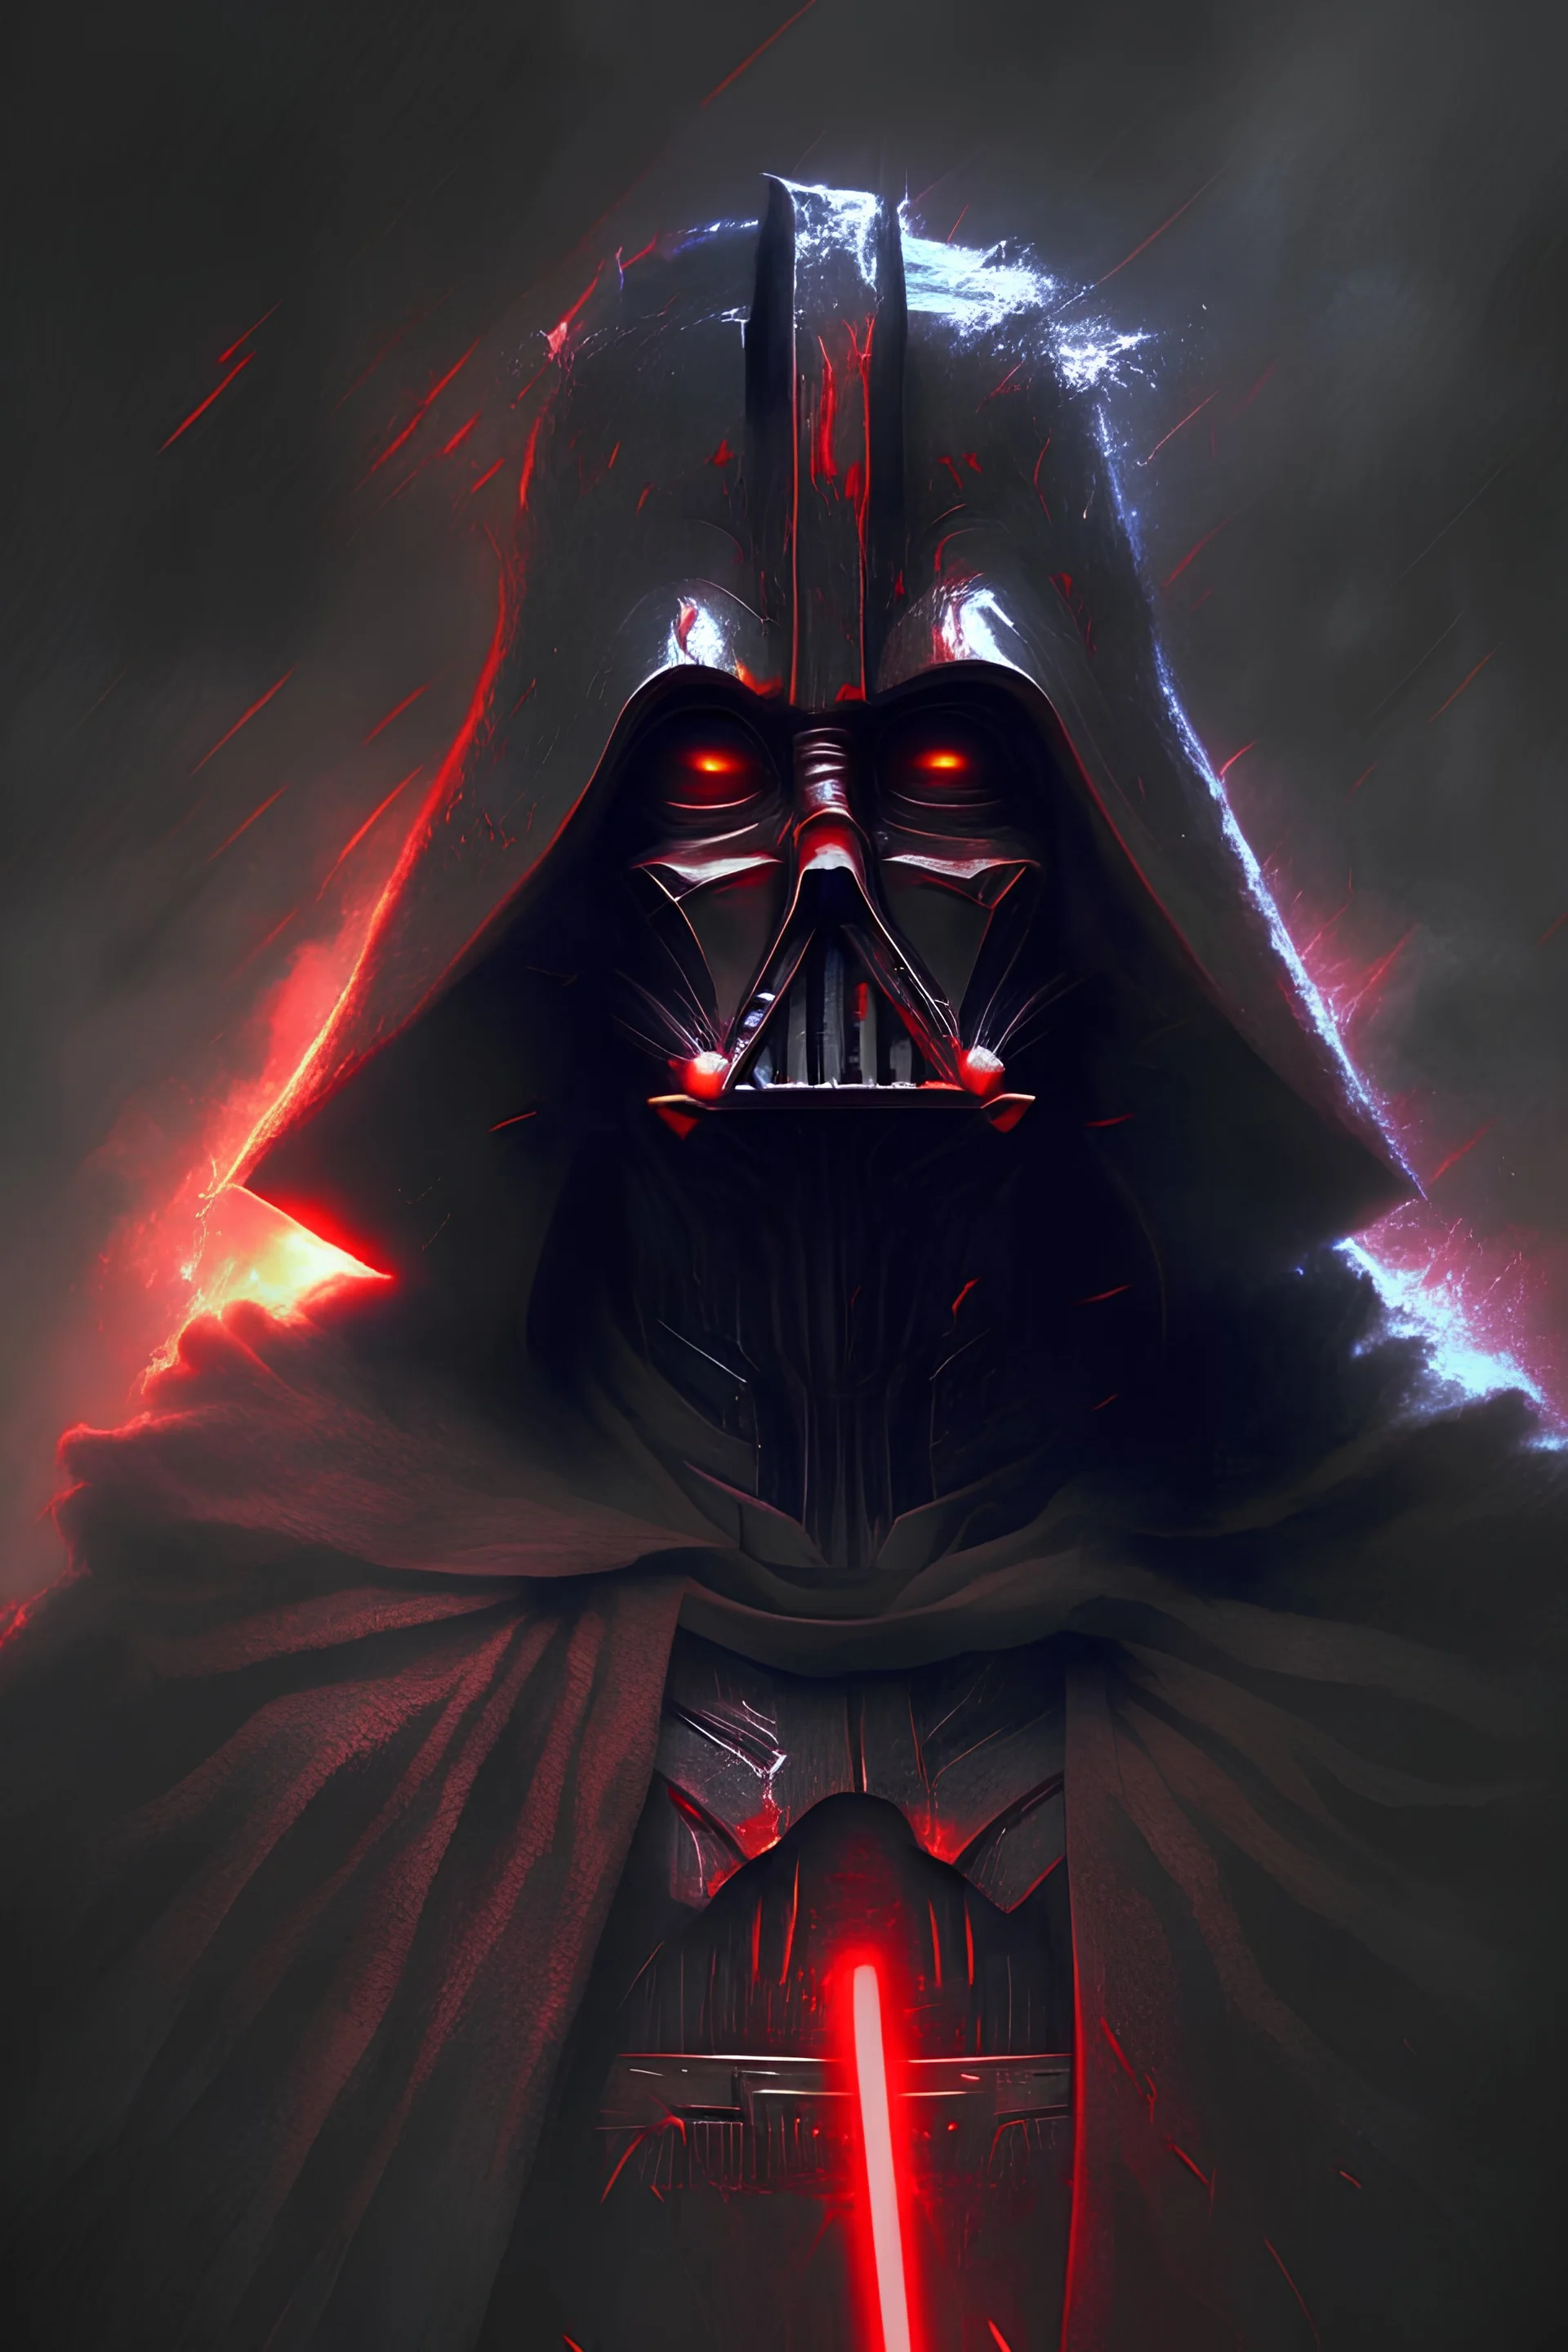 Dark Lord of the sITH